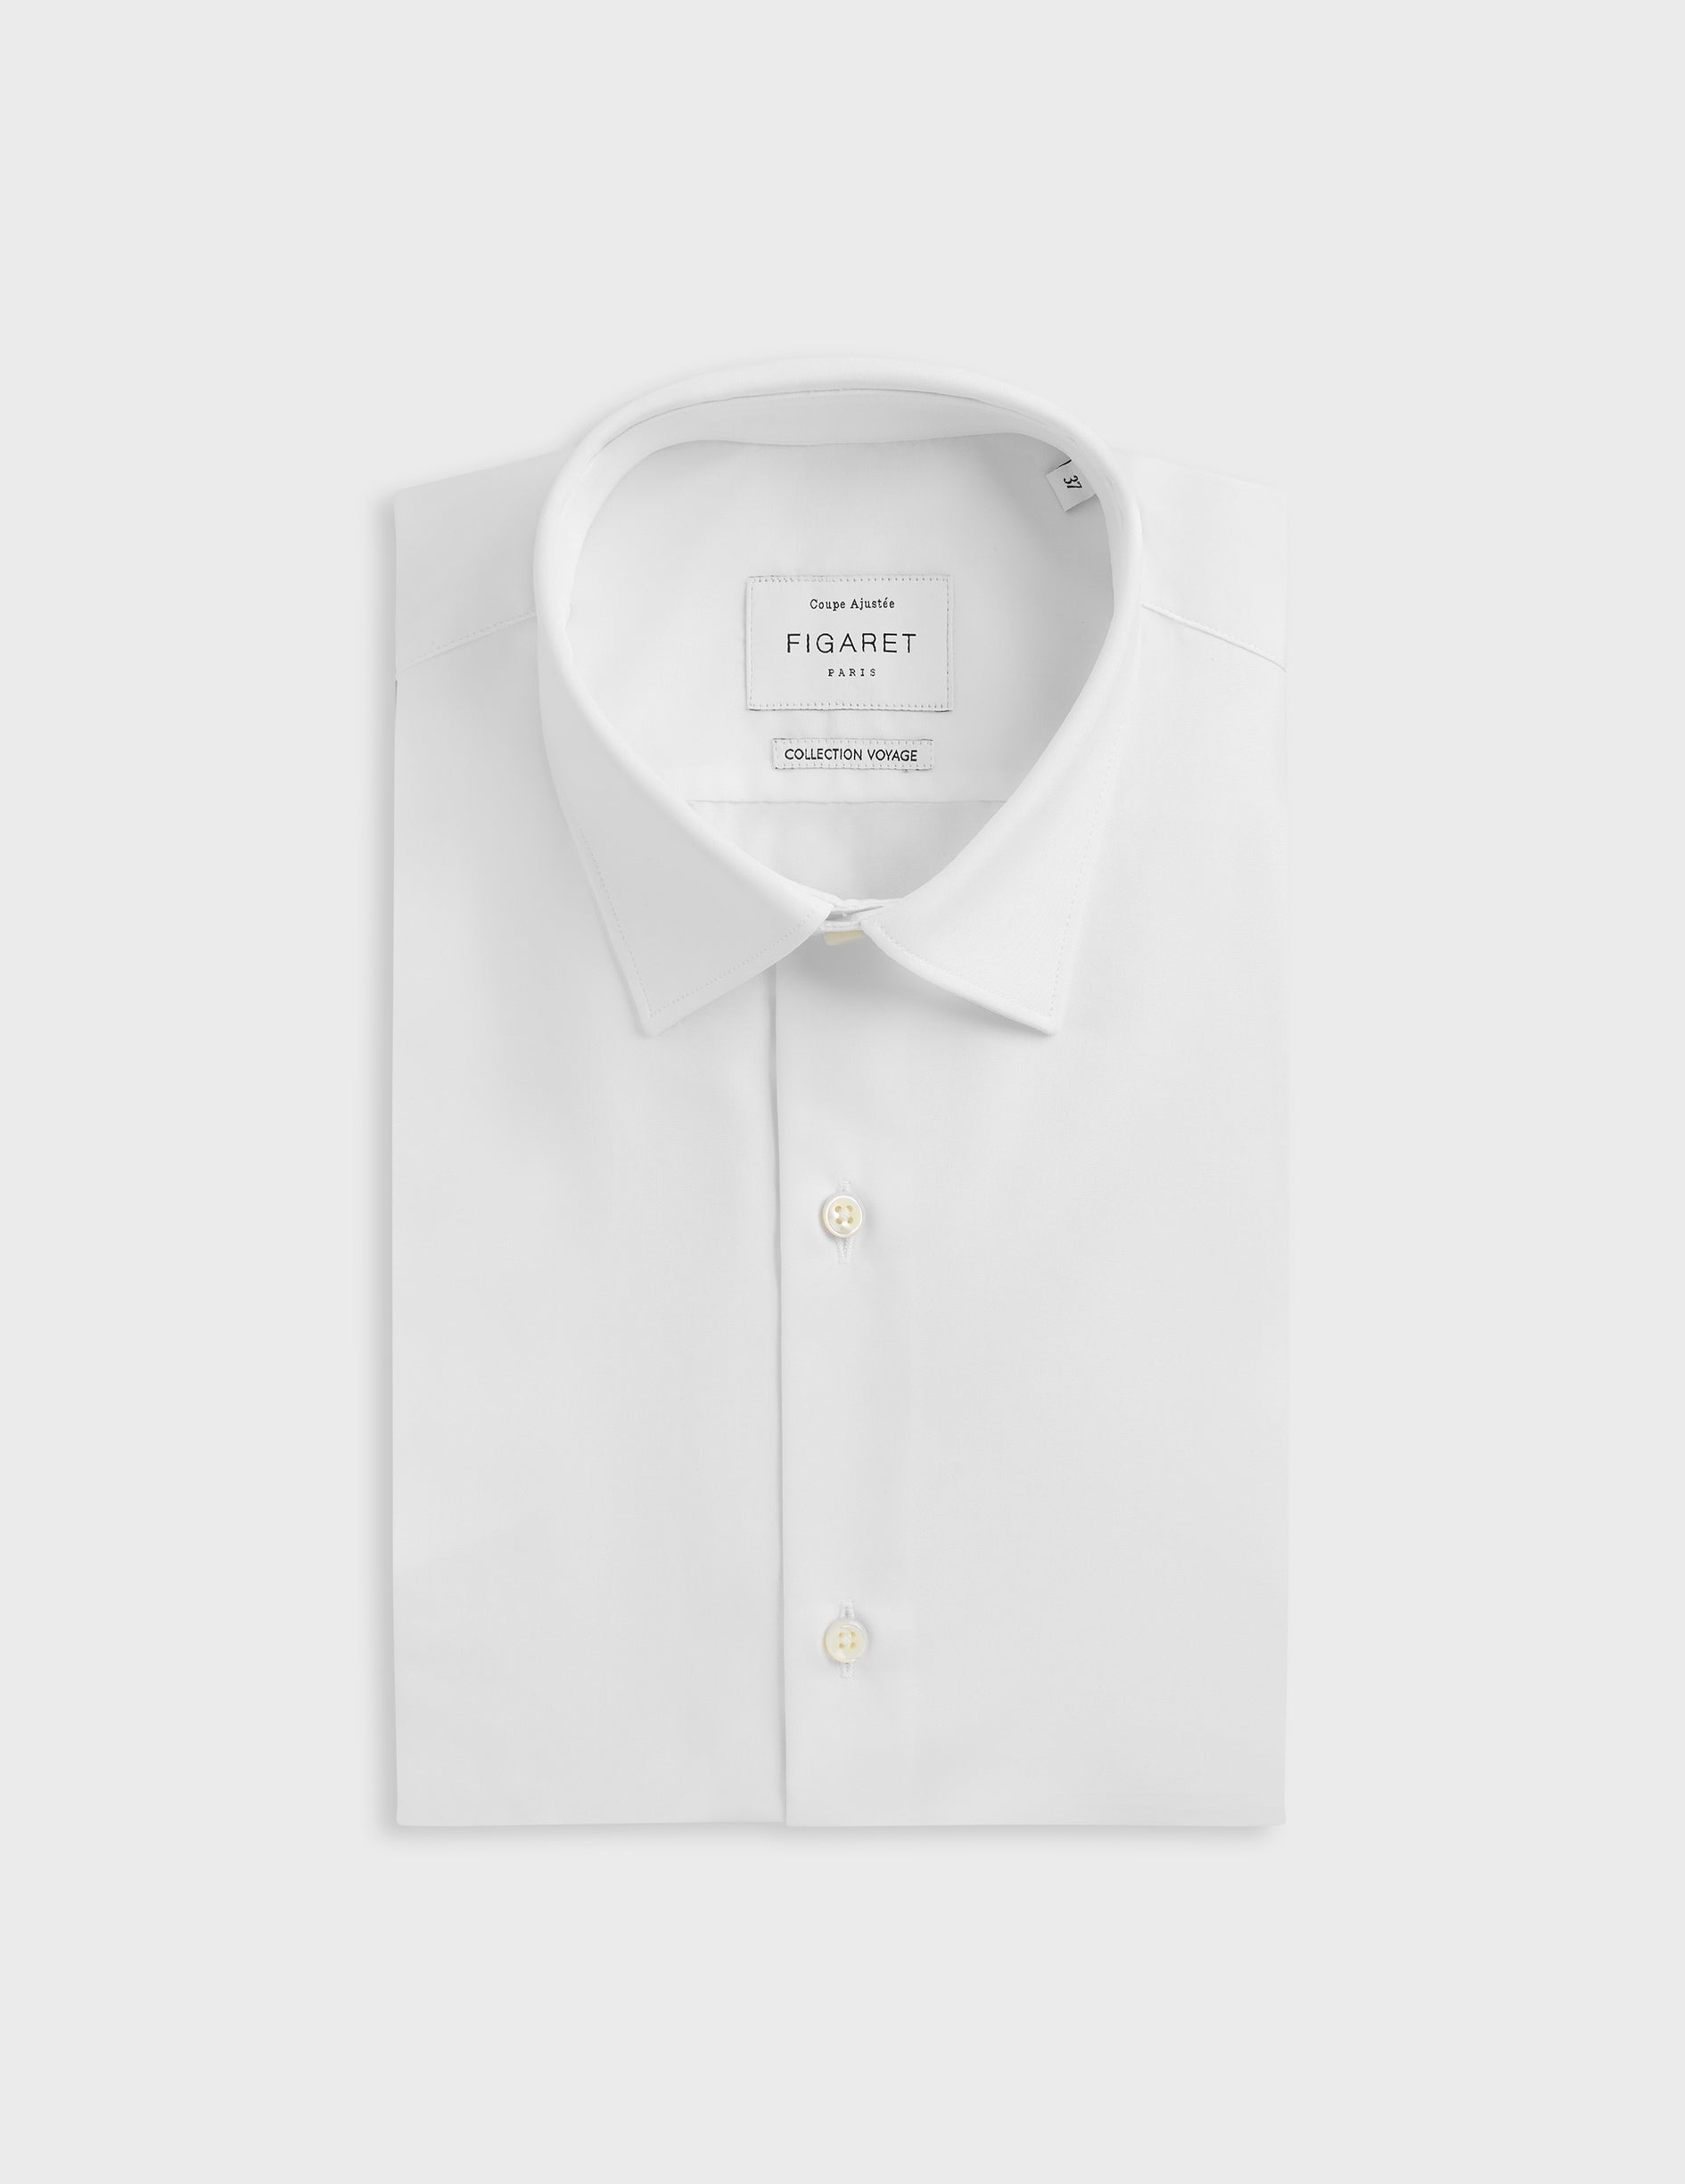 Fitted white wrinkle-free shirt - Poplin - Figaret Collar